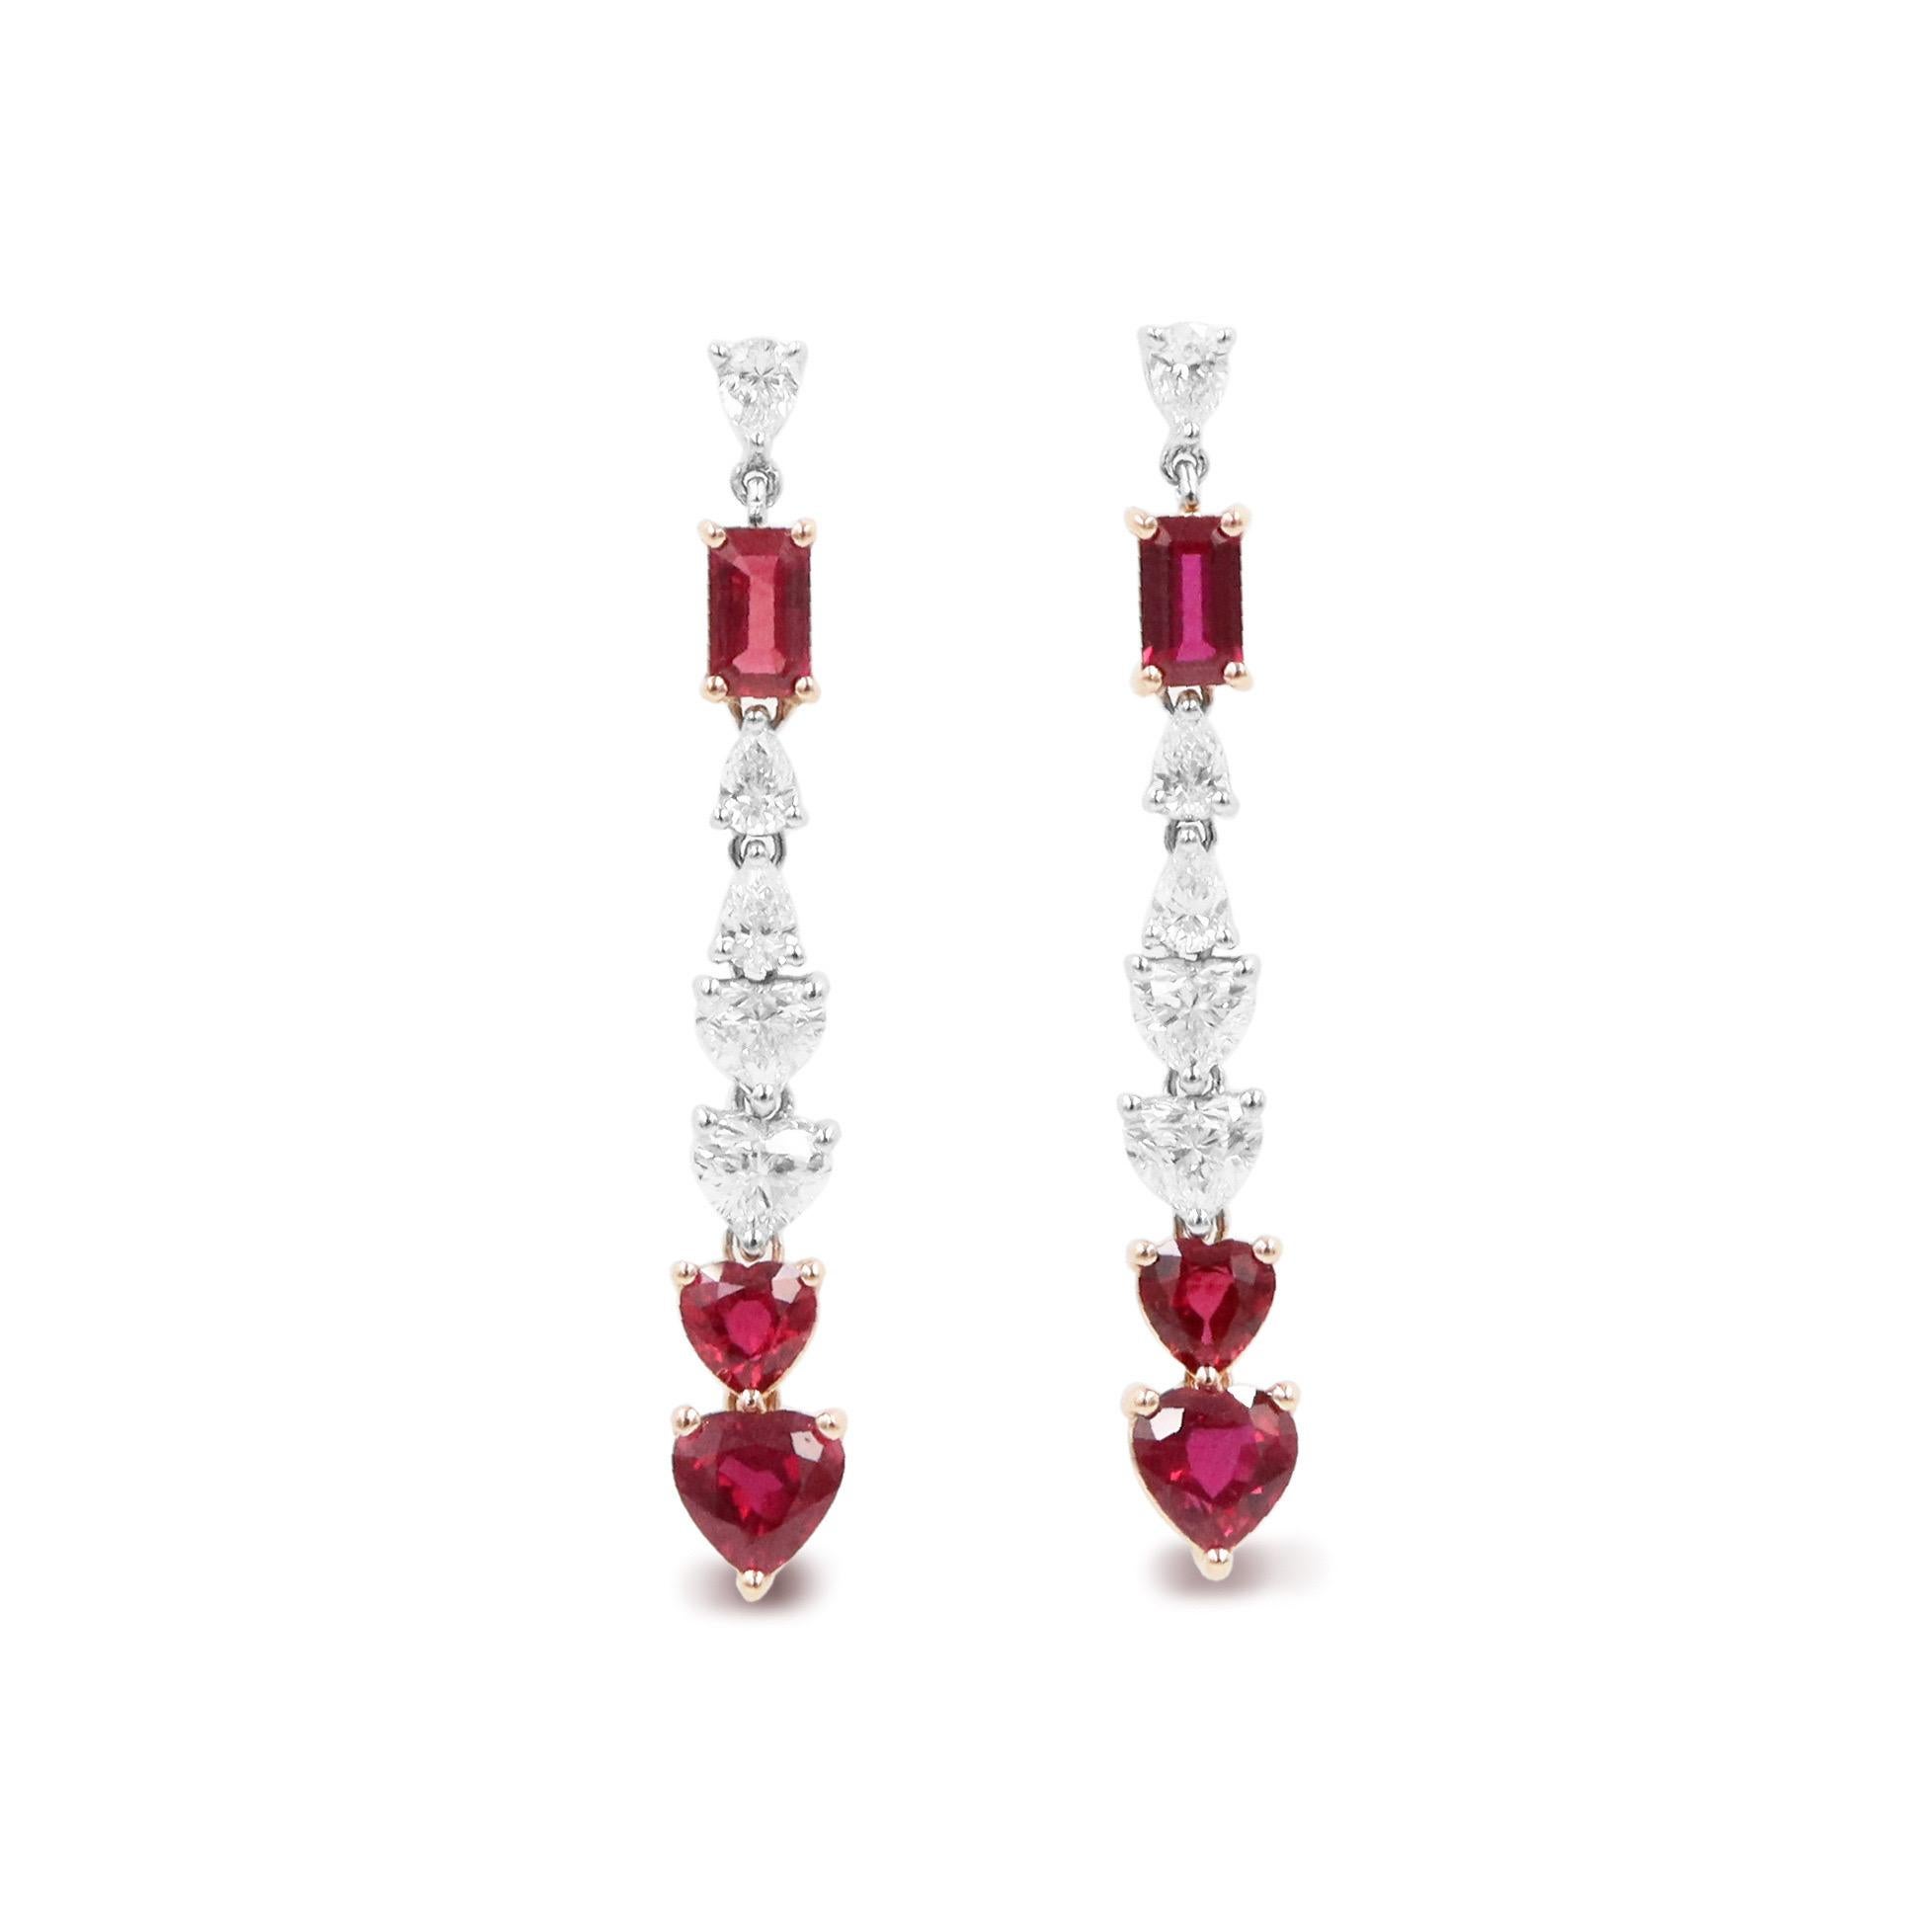 from the vault at Emilio Jewelry located on New York's iconic Fifth Avenue,
Diamond Weight: 1.24 carats D-F vs1-vs2 
Ruby Stone Weight: 2.34ct Vivid Red Pigeon blood 
Please inquire for additional details. All pieces are hand made in the Emilio